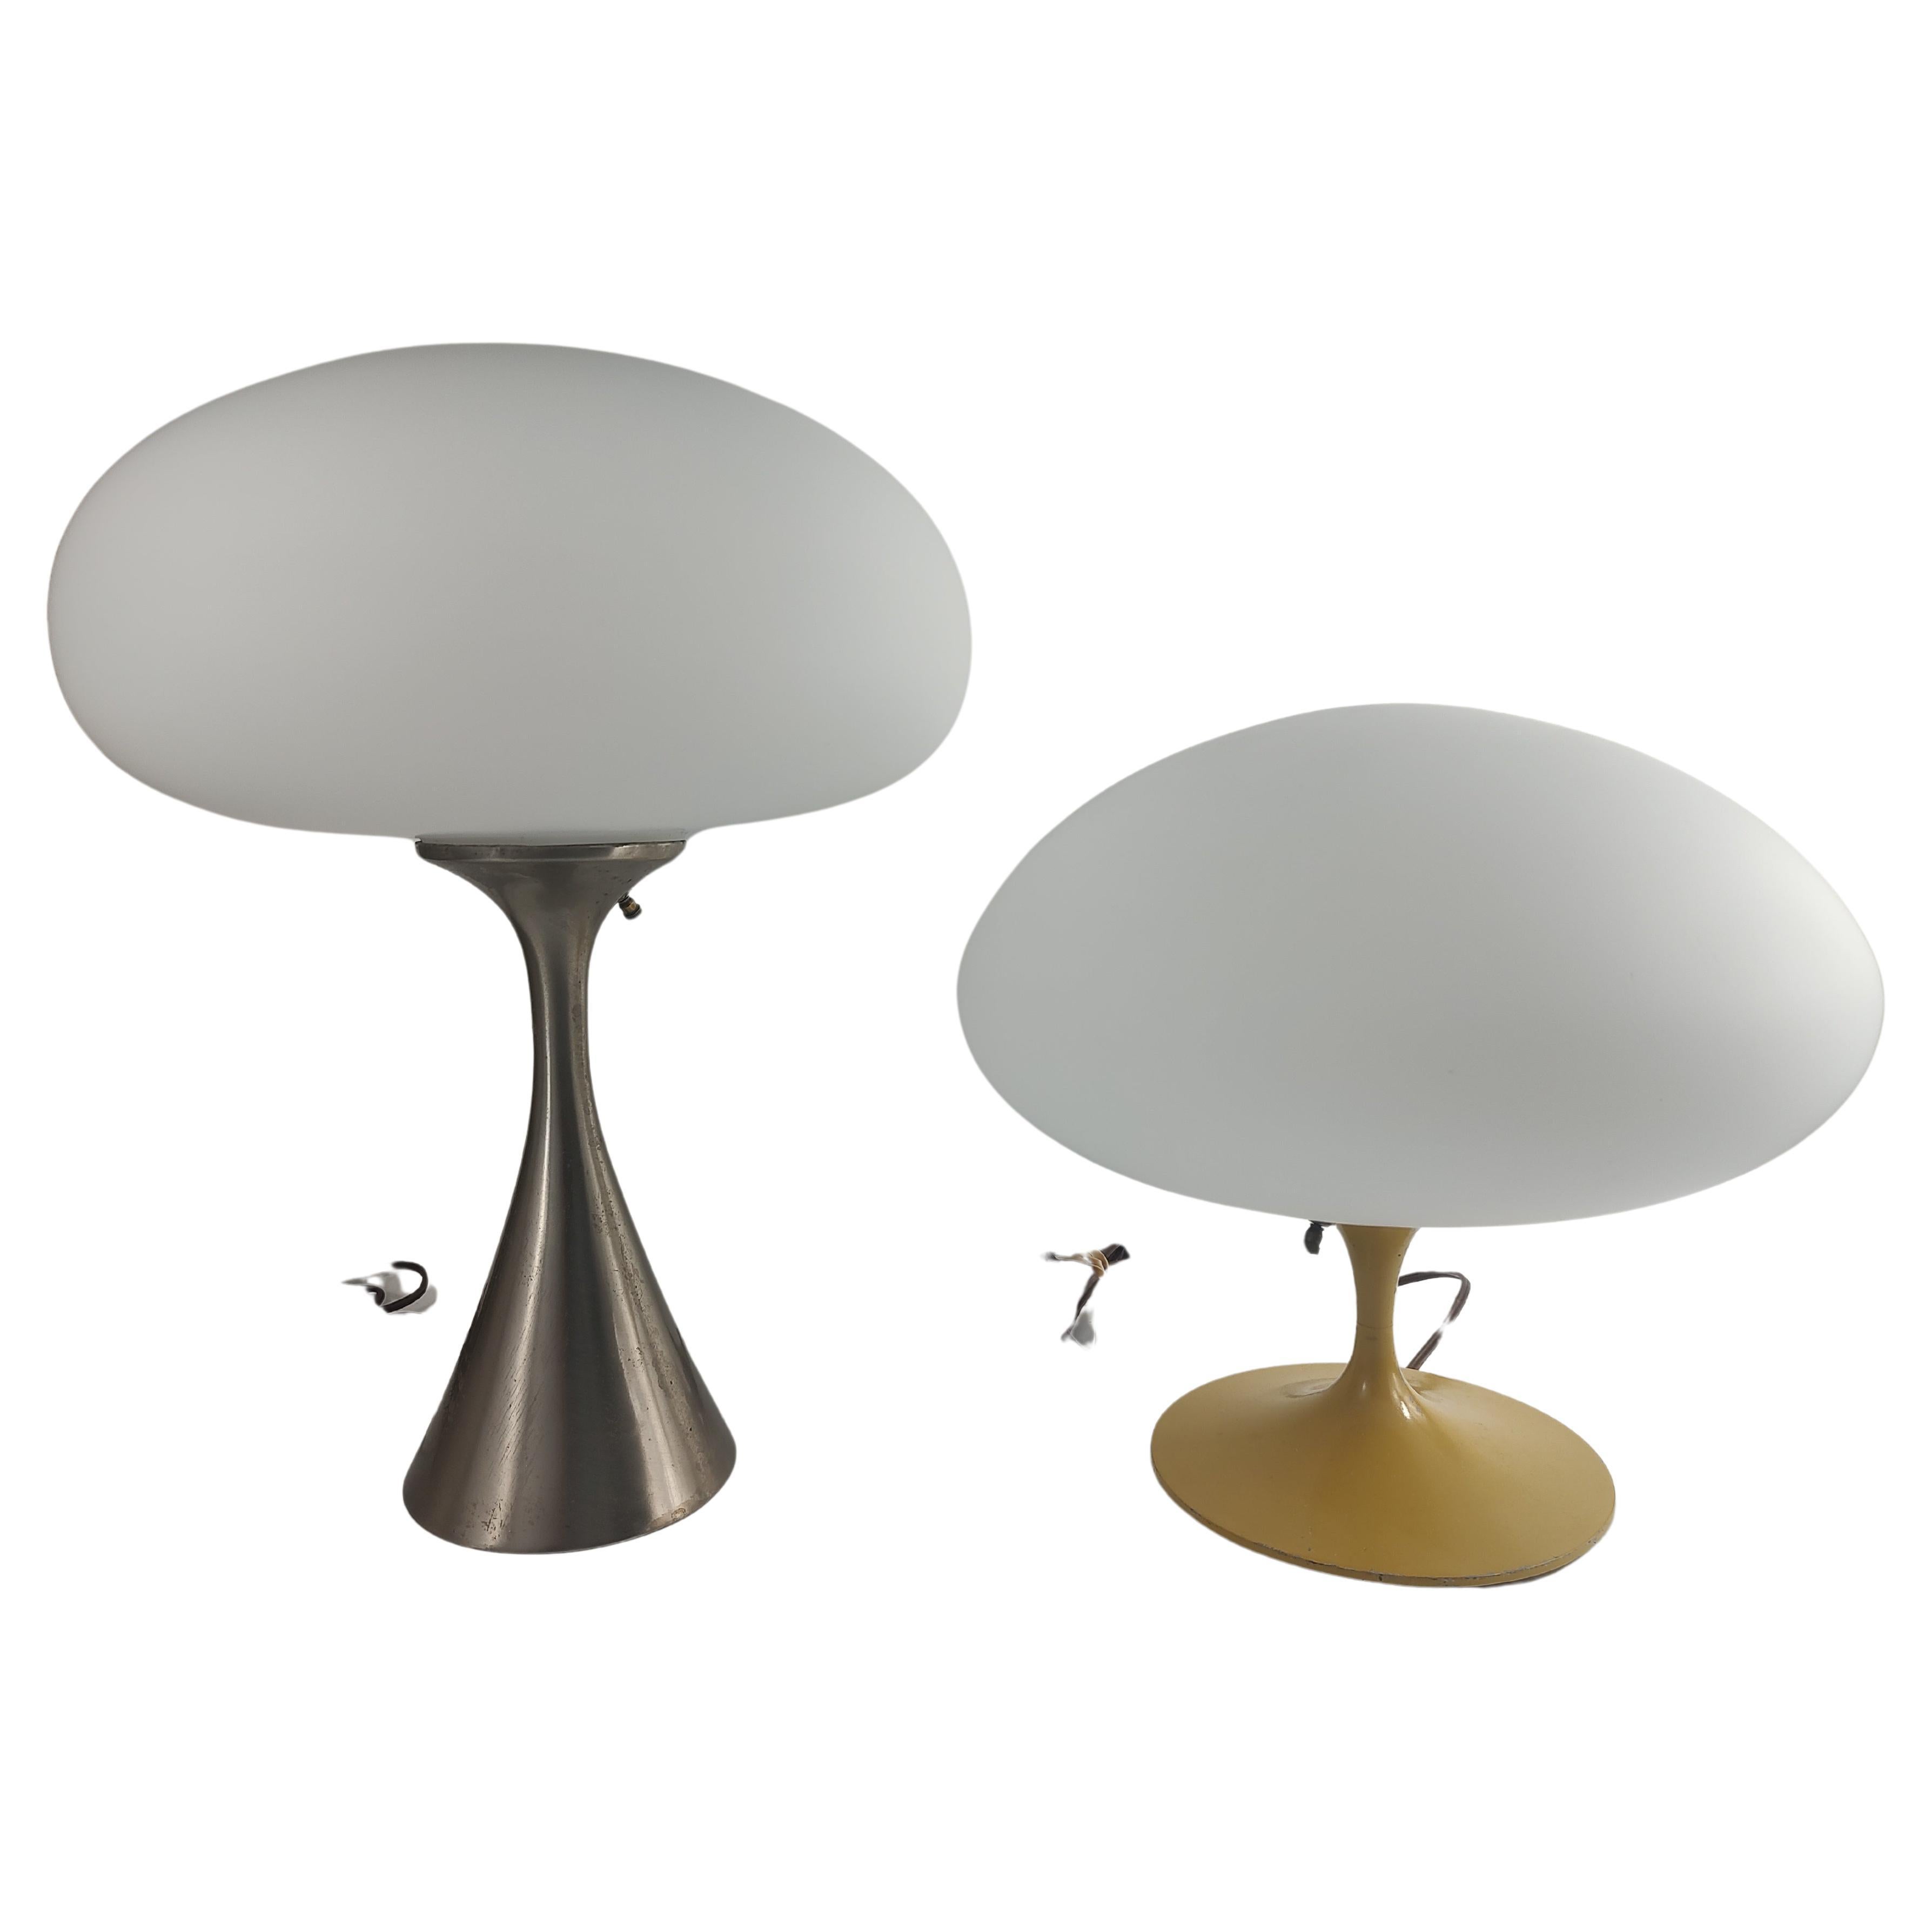 Plated Mid Century Modern Sculptural Mushroom Table Lamps by Laurel Lamp Co. C1965 For Sale